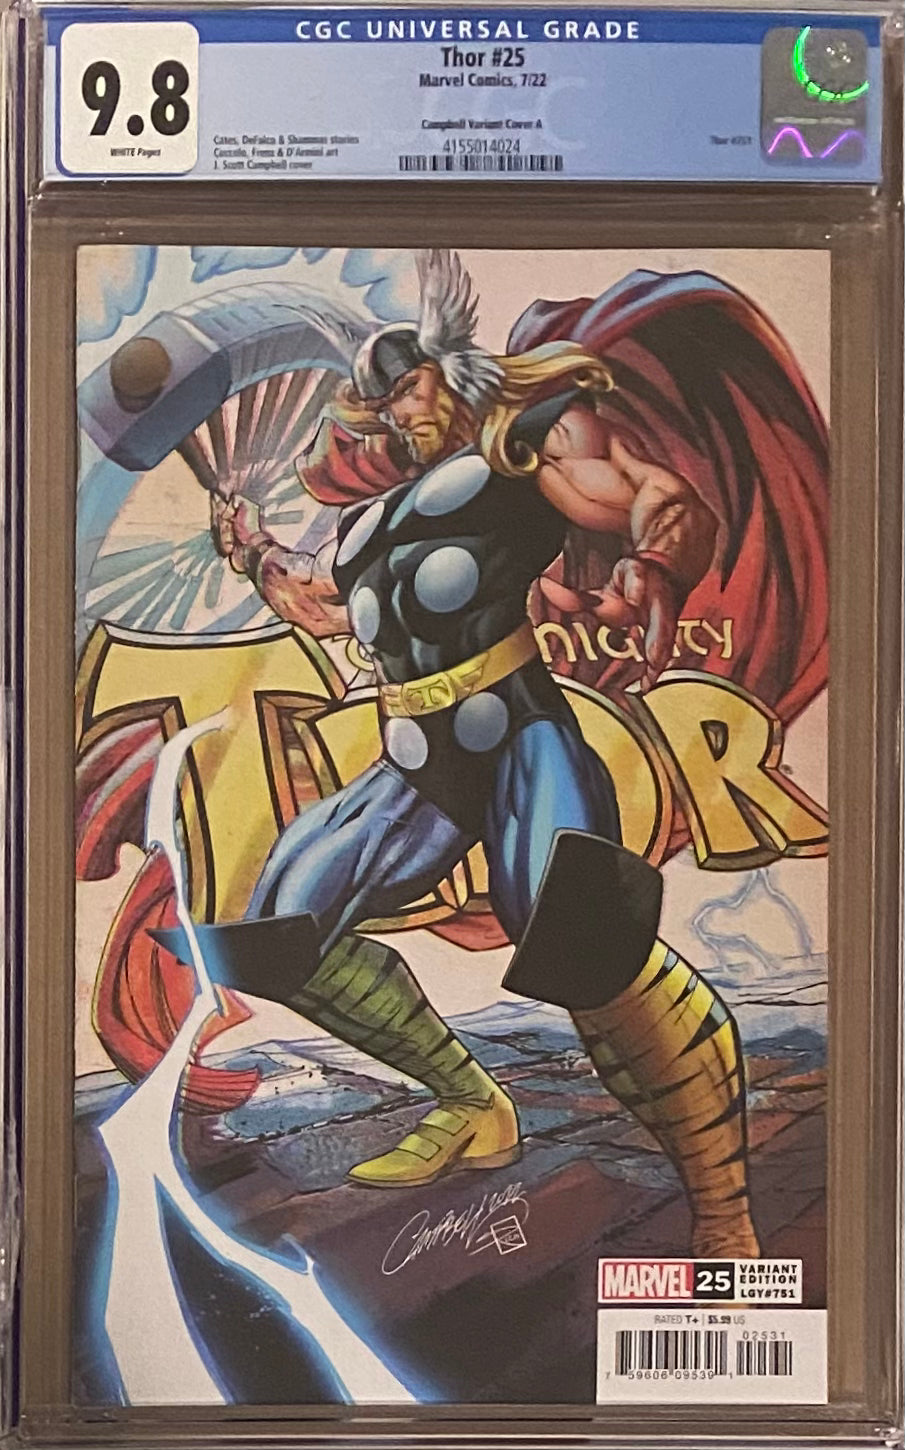 Thor #25 Campbell Variant CGC 9.8